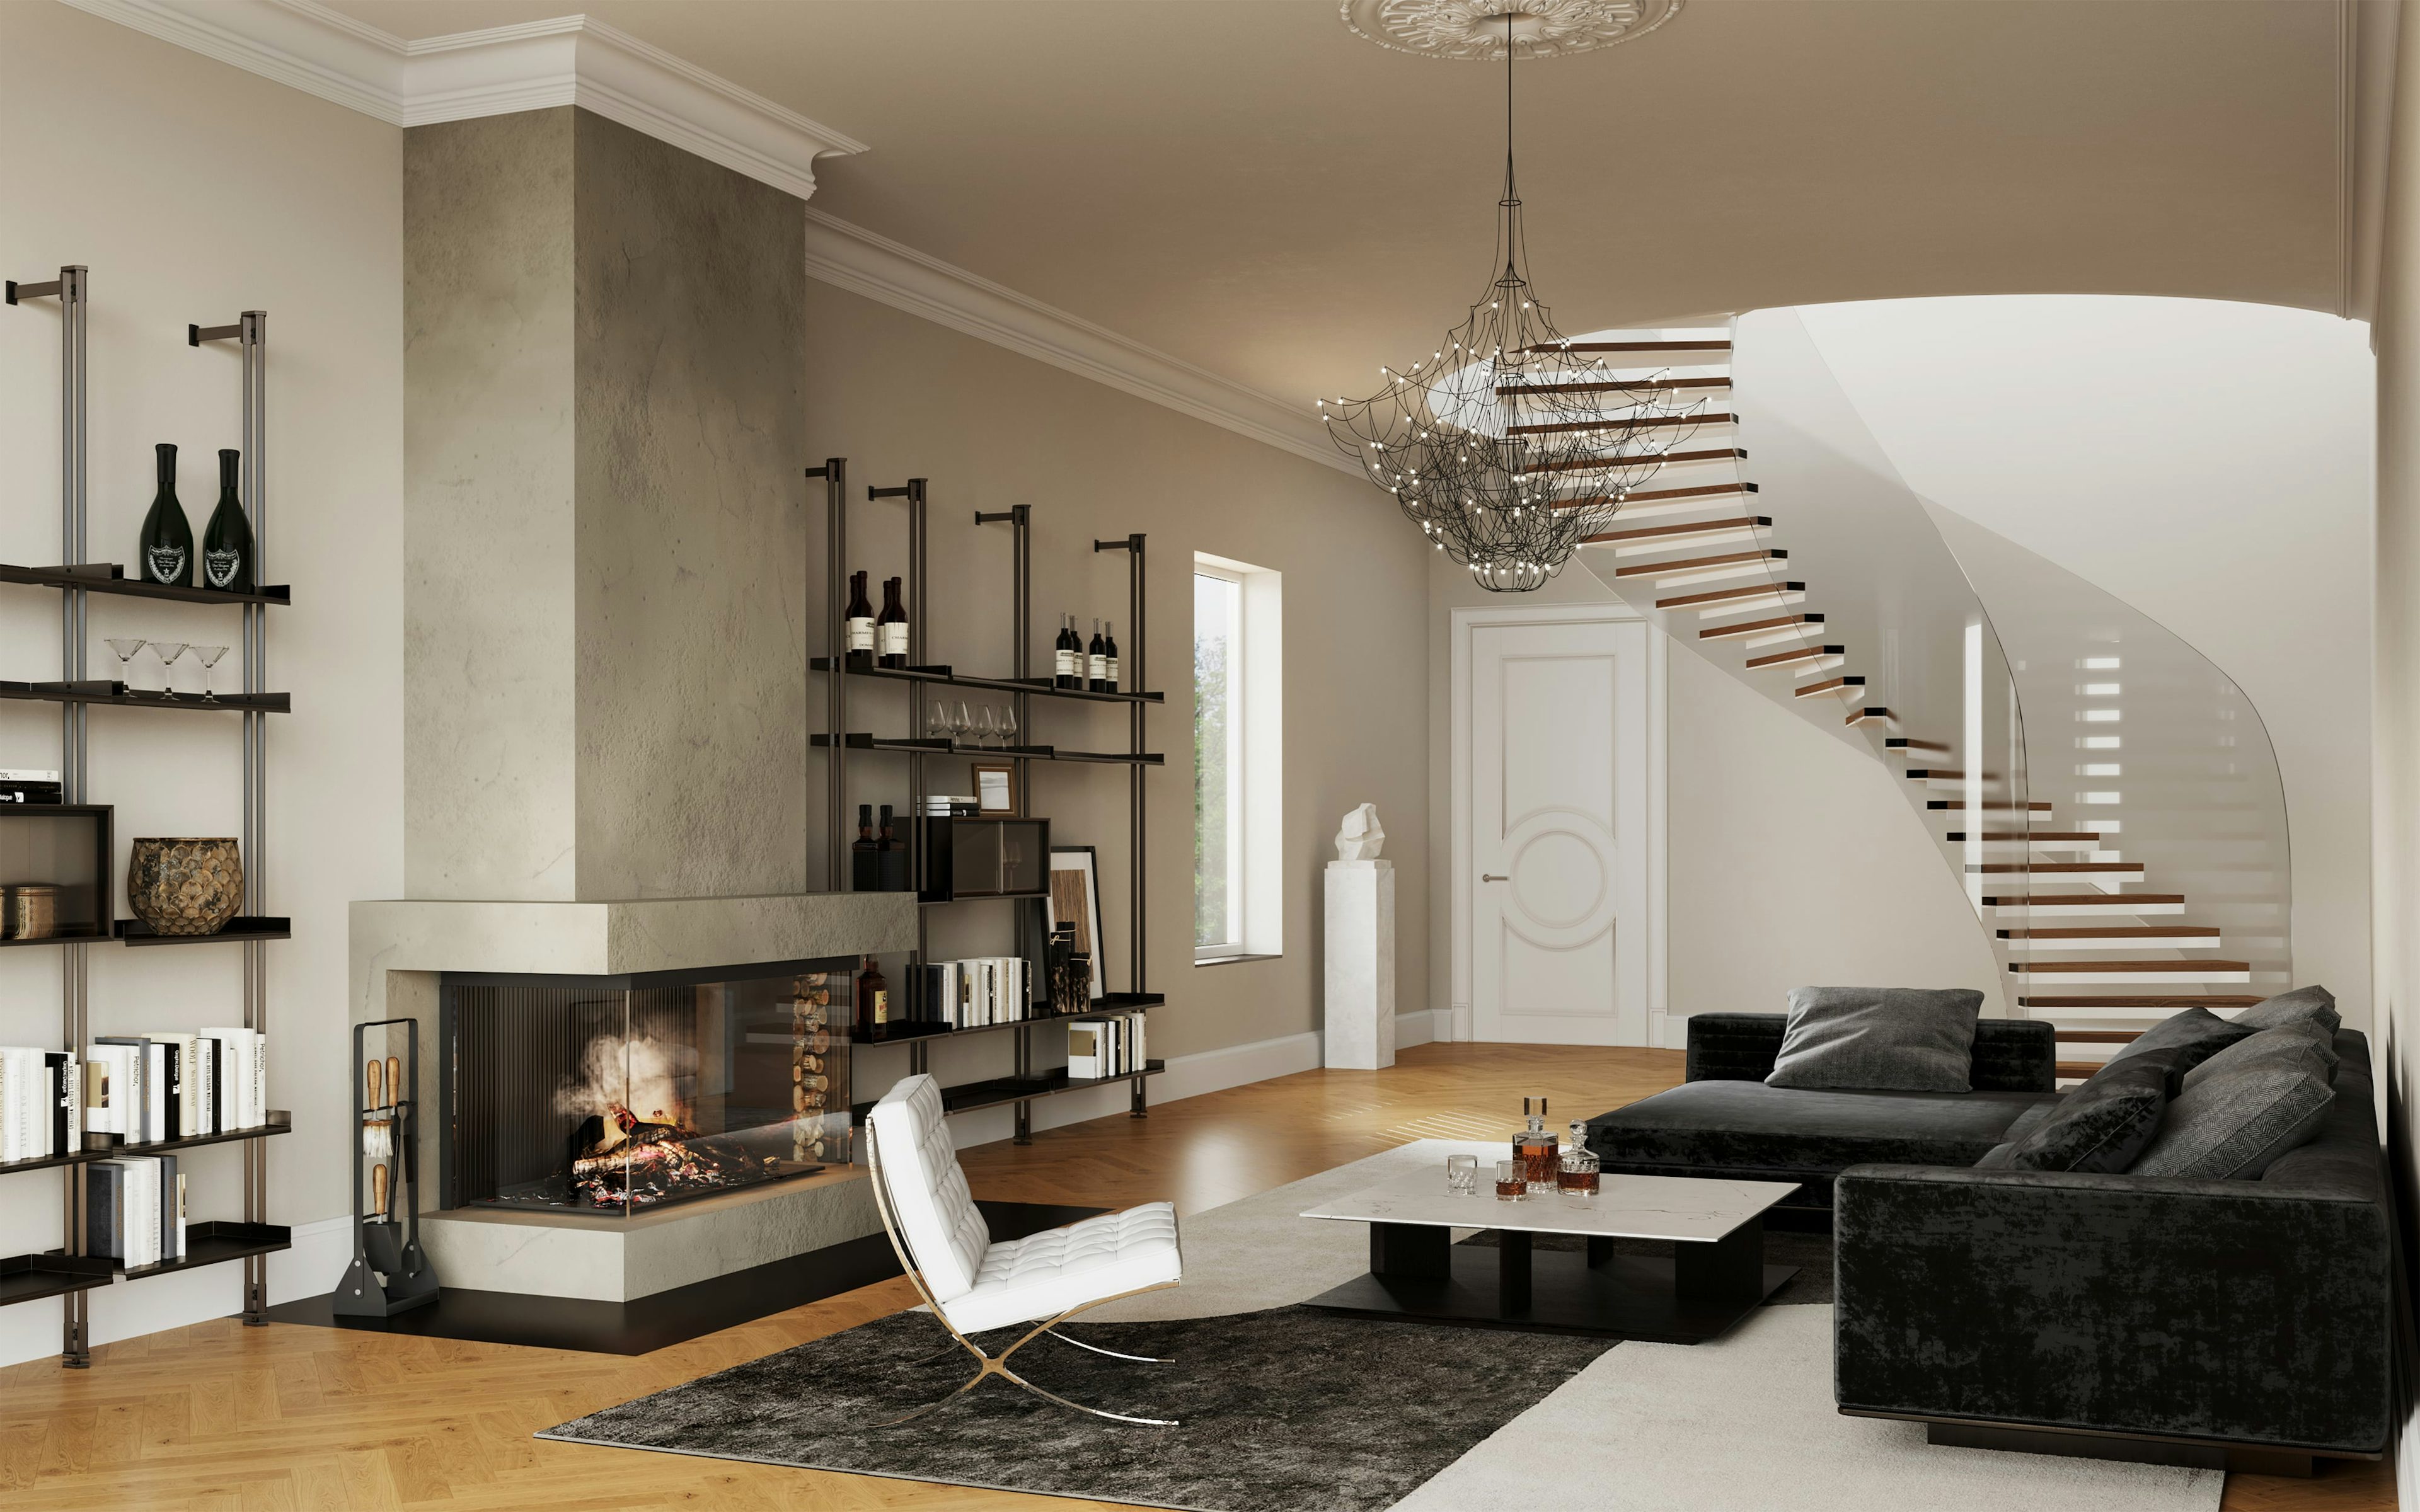 3D Architectural interior visualization of living room / study / library with fireplace and staircase in private villa in Hamburg Germany